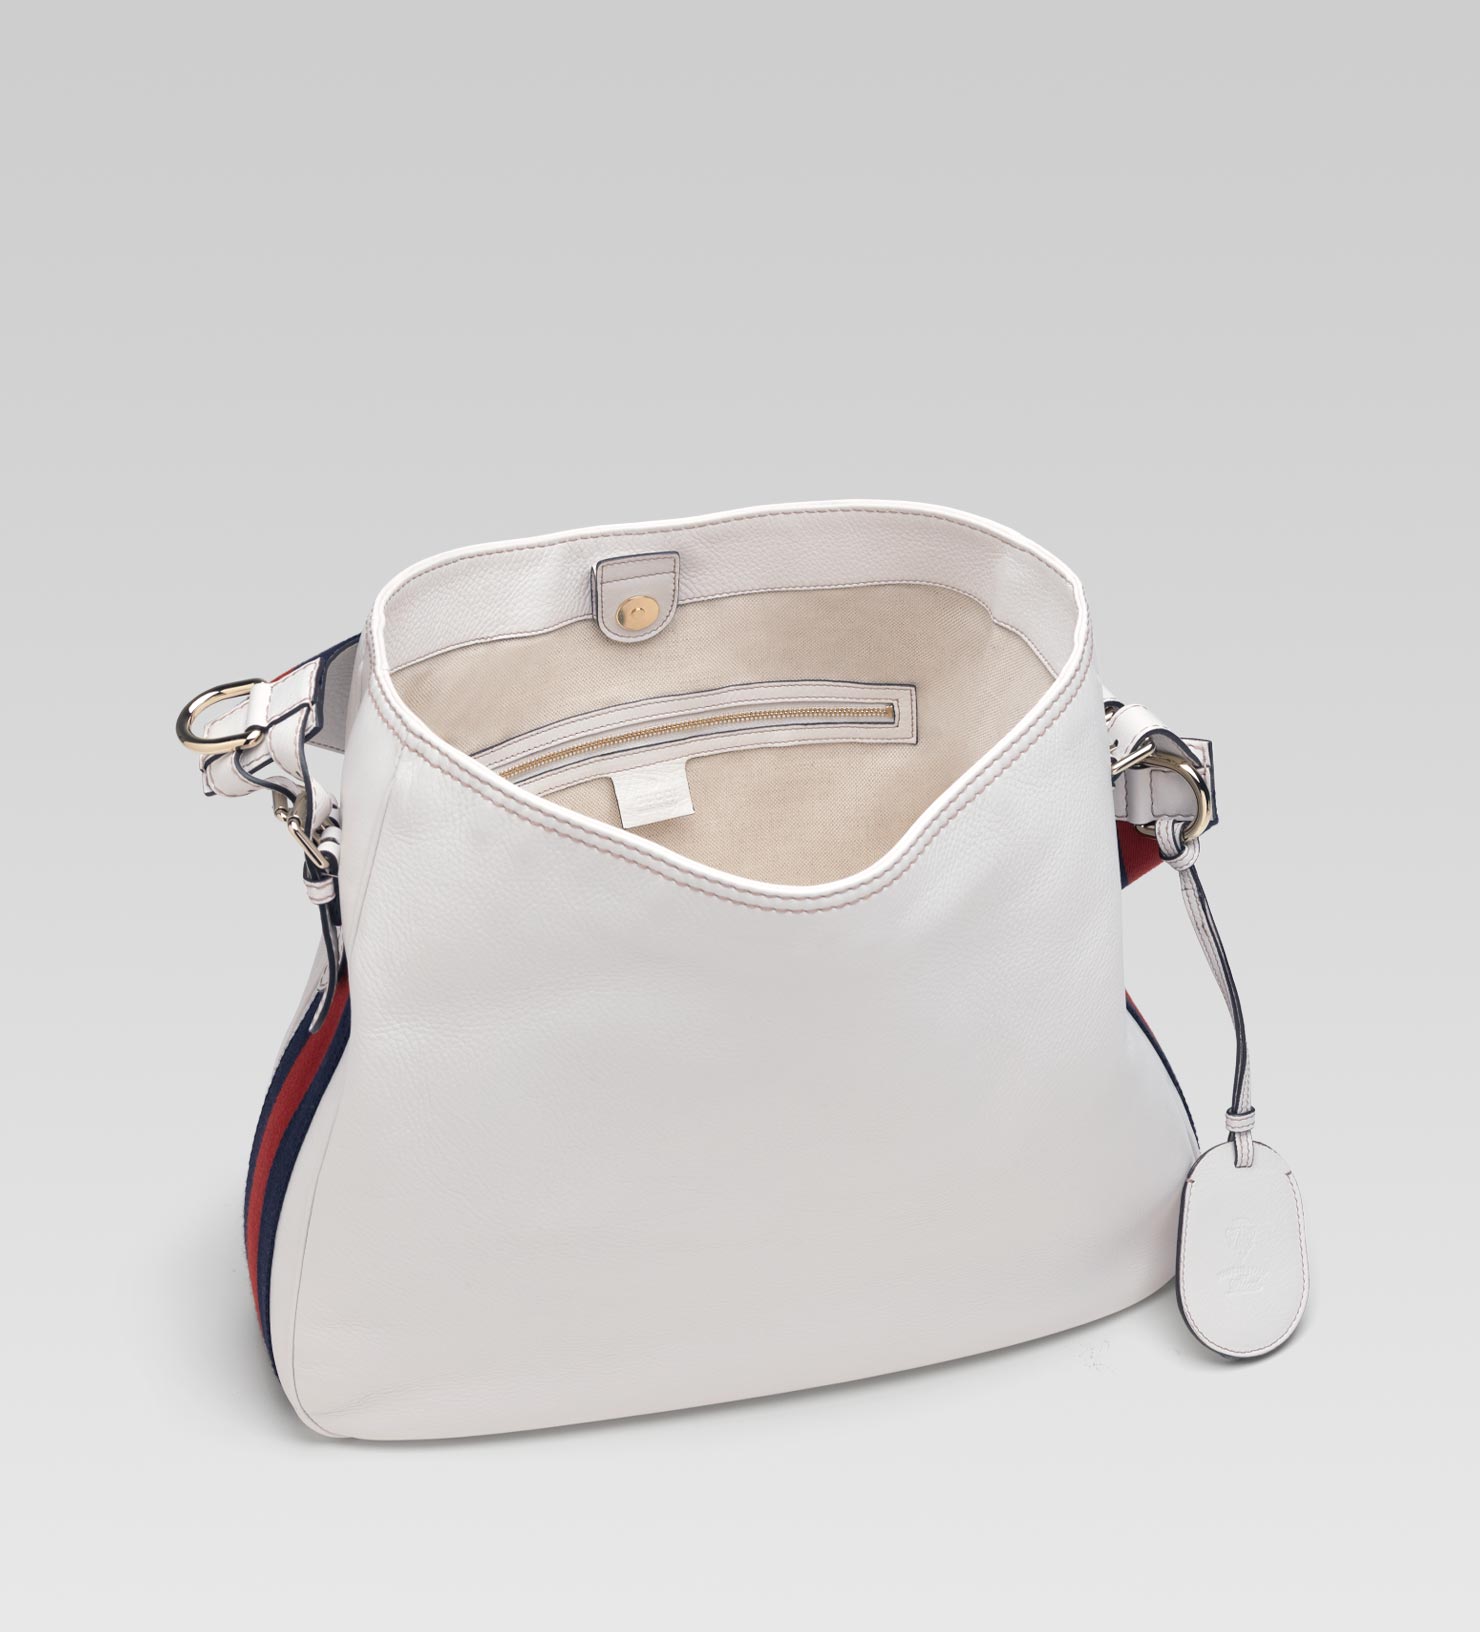 Gucci Gucci Heritage Medium Shoulder Bag with Web Detail in White - Lyst